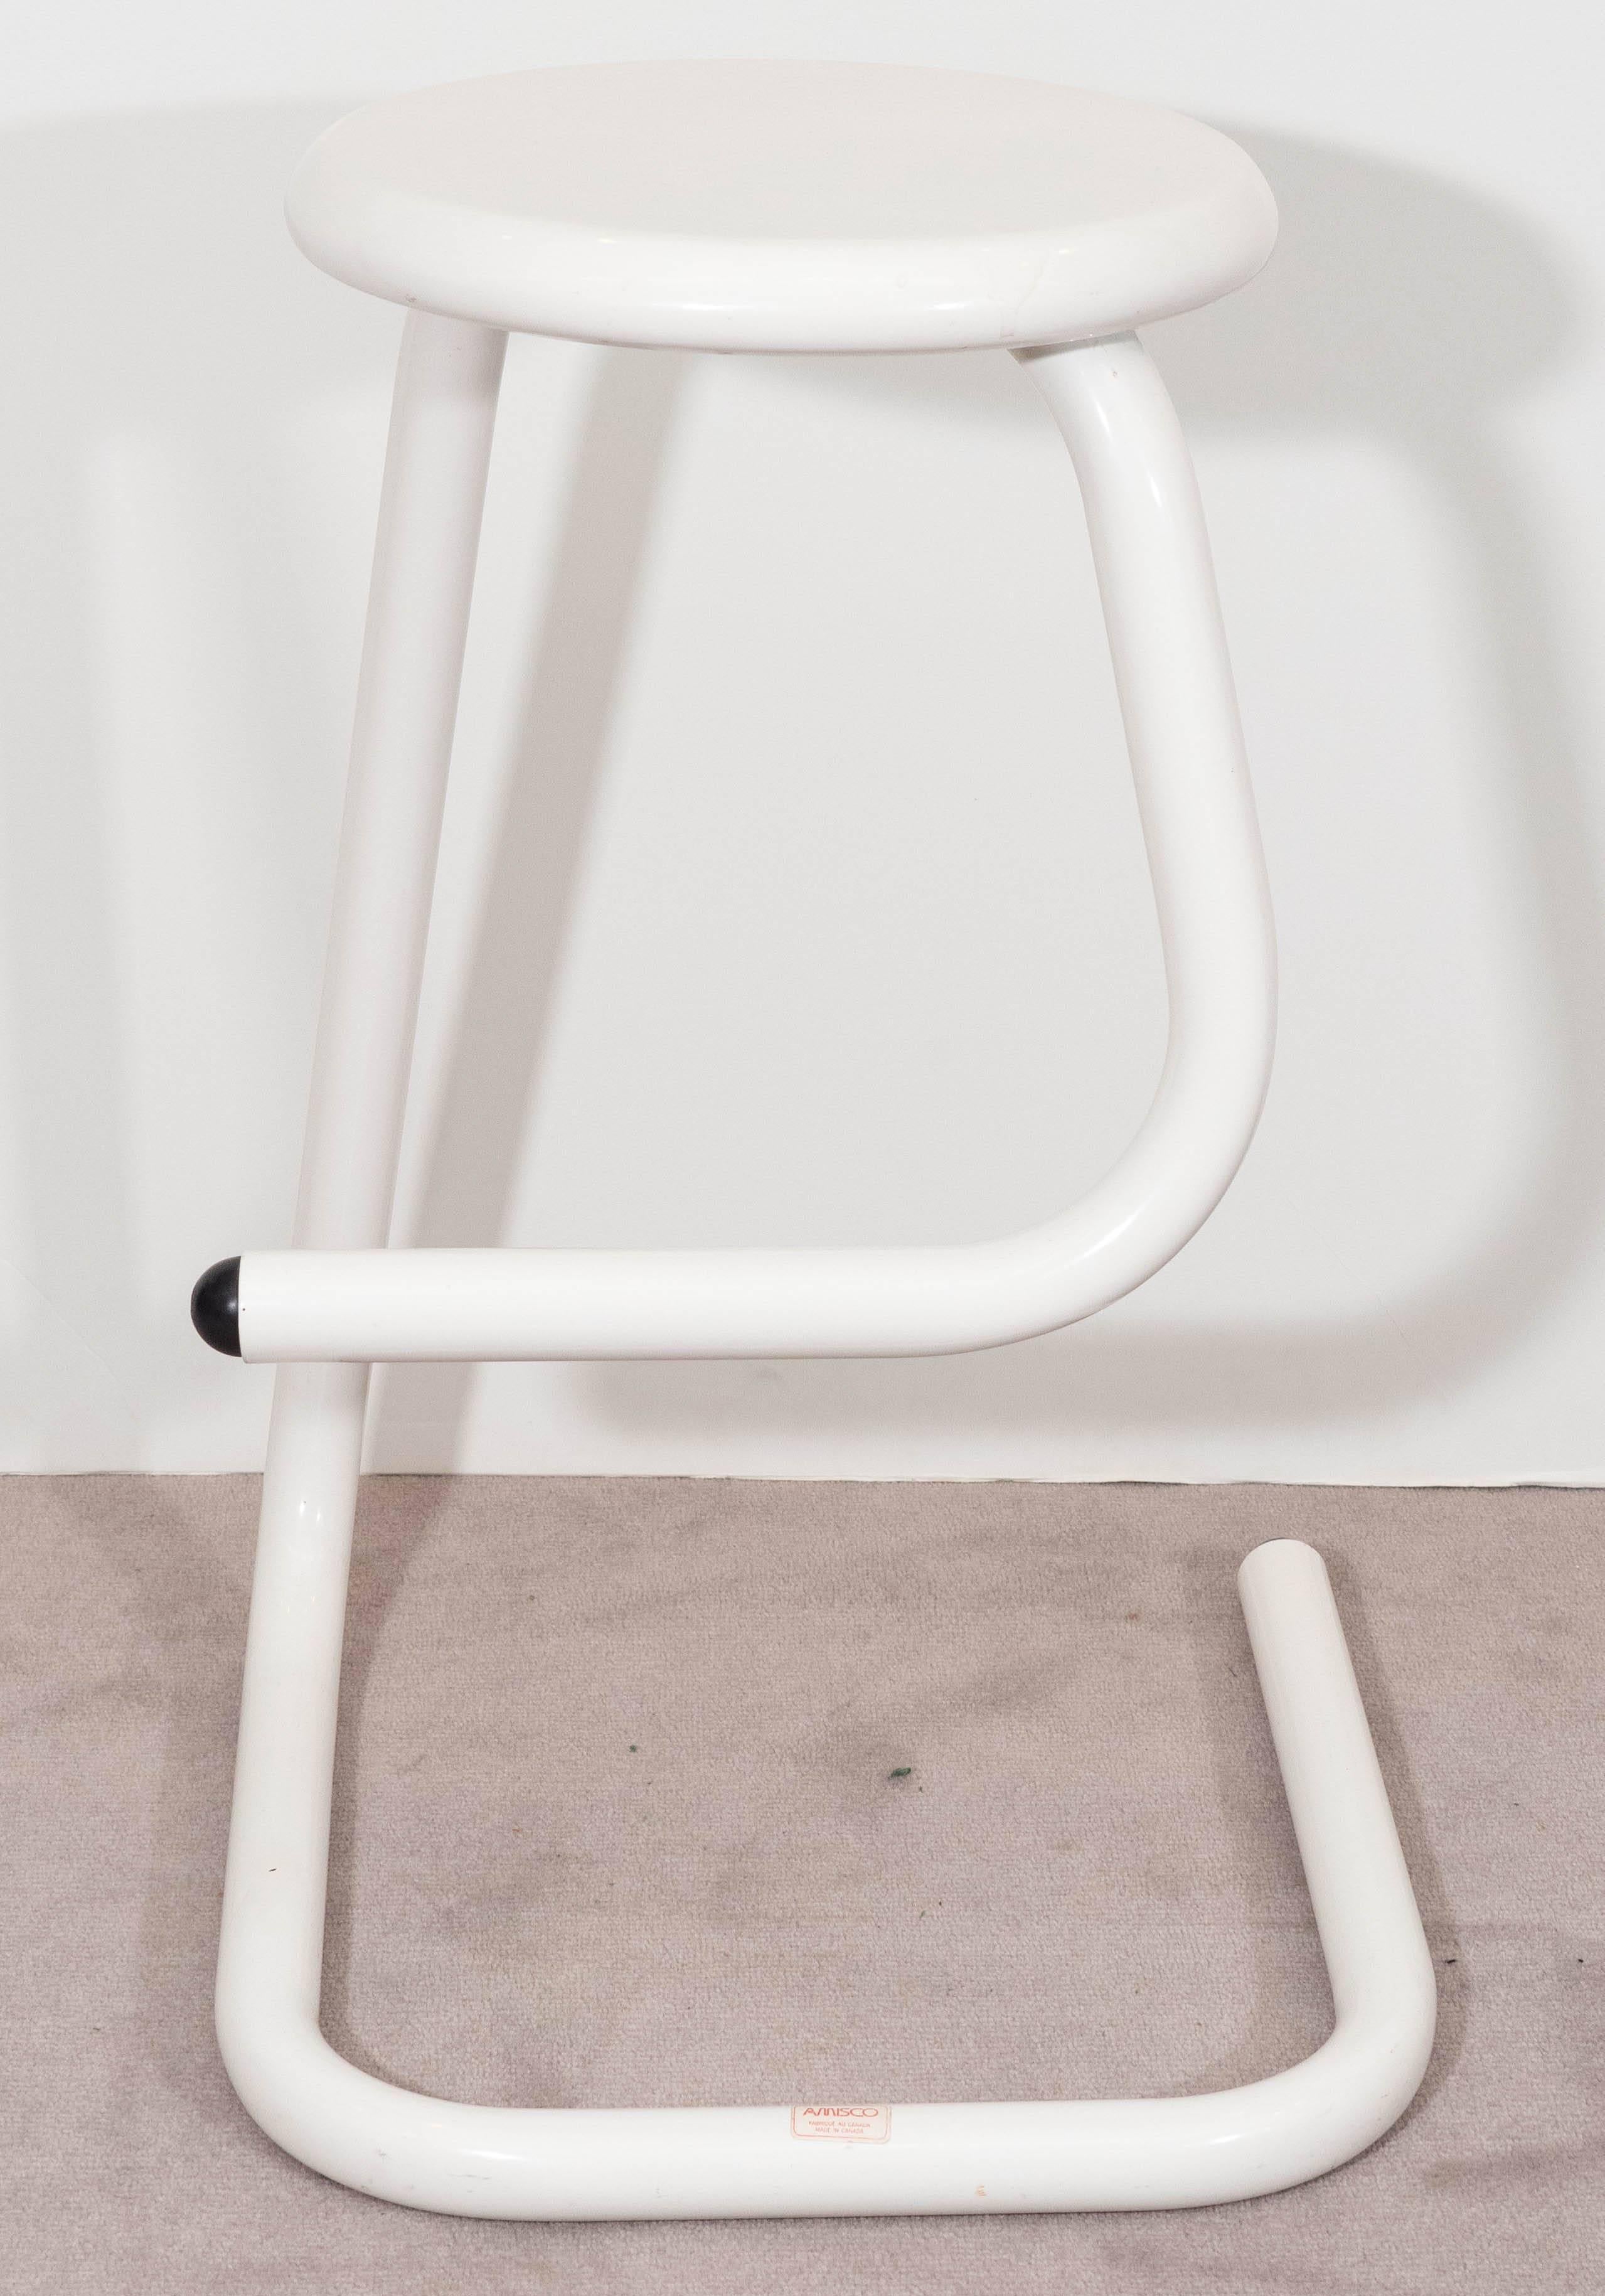 A pair of vintage highly modernistic metal bar stools, produced in Canada, circa 1960s to 1970s by Les Industries Amisco, each in white, the seats set on a winding, single paperclip form tubular base. Markings include label [AMISCO/Fabrique au